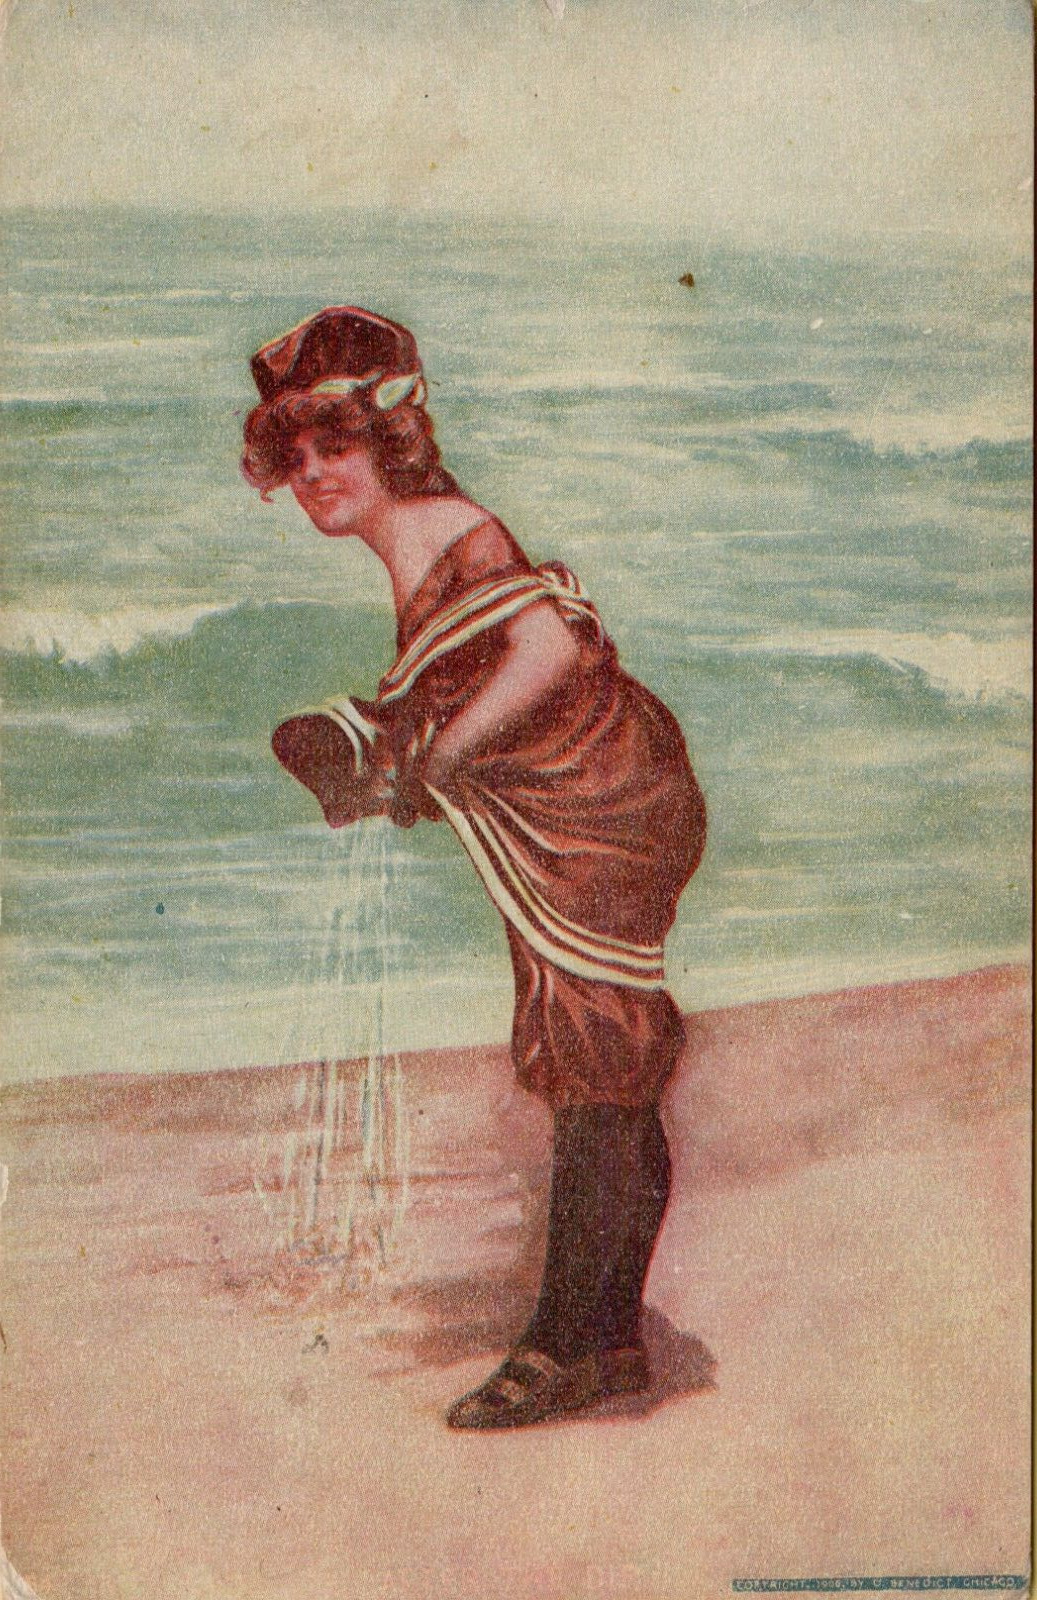 Bathing Beauty Postcard Woman Wringing out Swimsuit from c1906 or before Posted